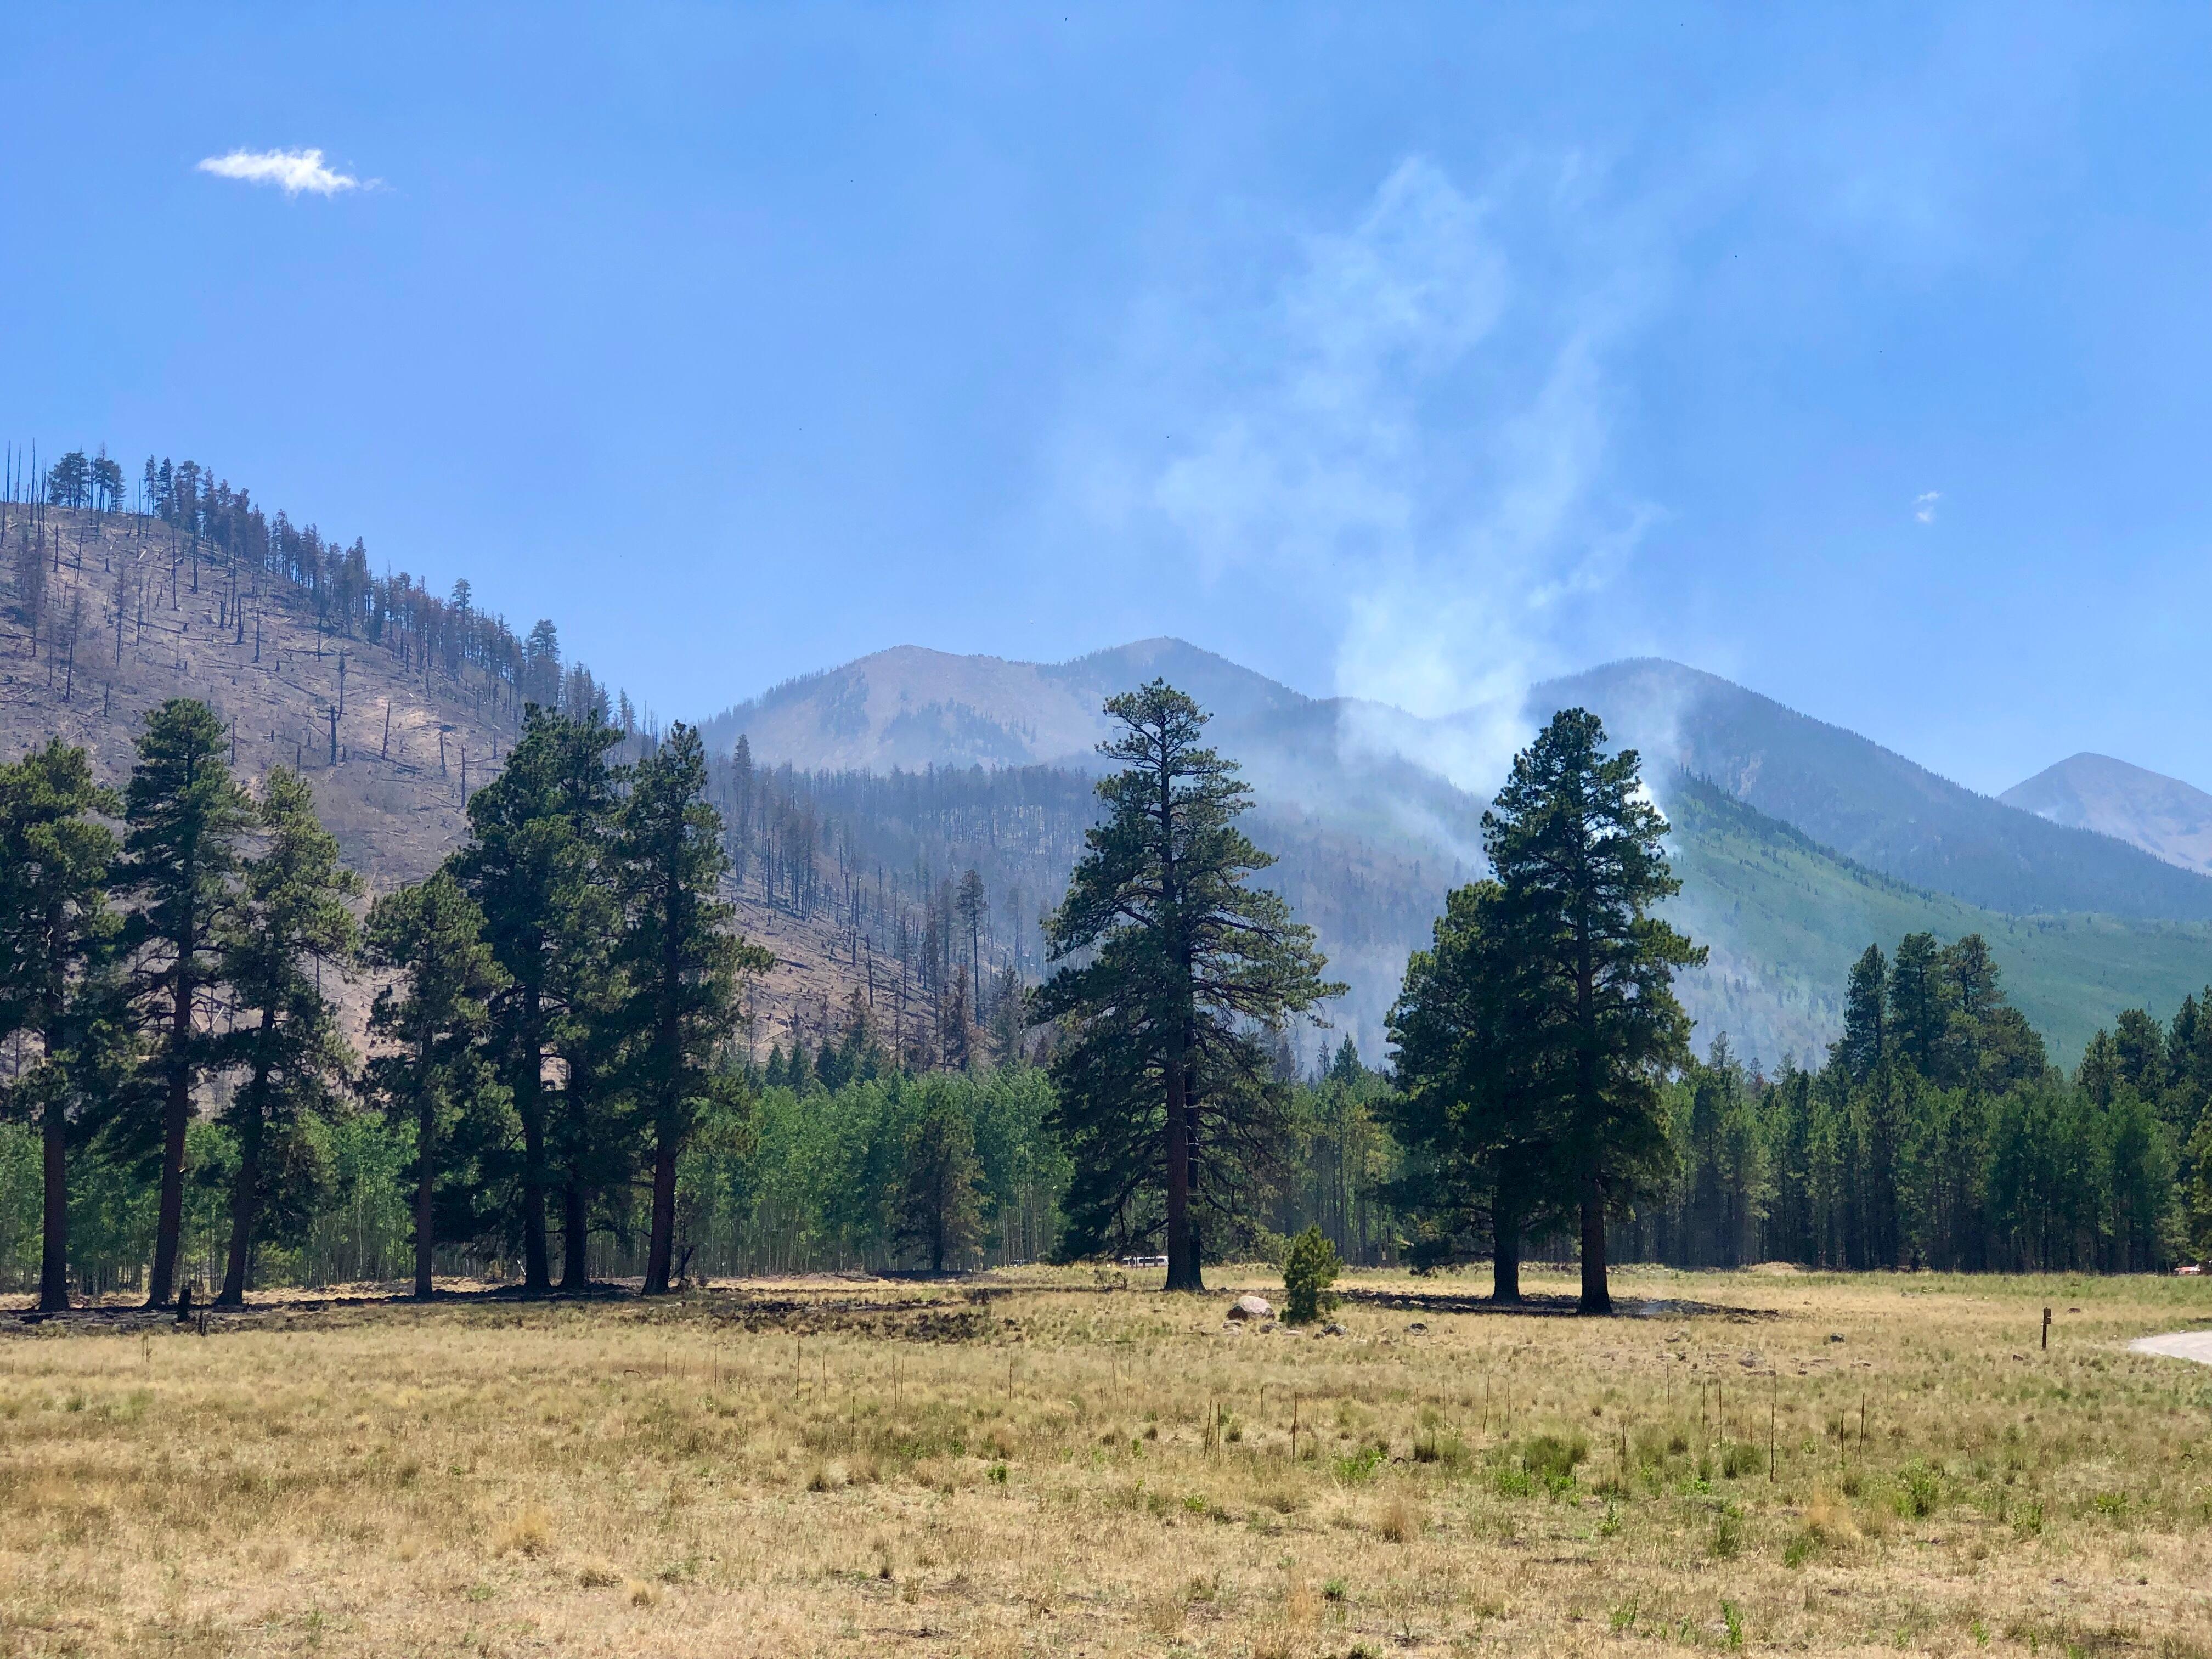 This photo is of Lockett Meadow in the Inner Basin of the San Francisco Peaks looking west towards Doyle and Fremont Peaks. This is where the campsites are in Lockett Meadow , as you can see no fire at campground. Photo taken by Matt McGrath on June 16